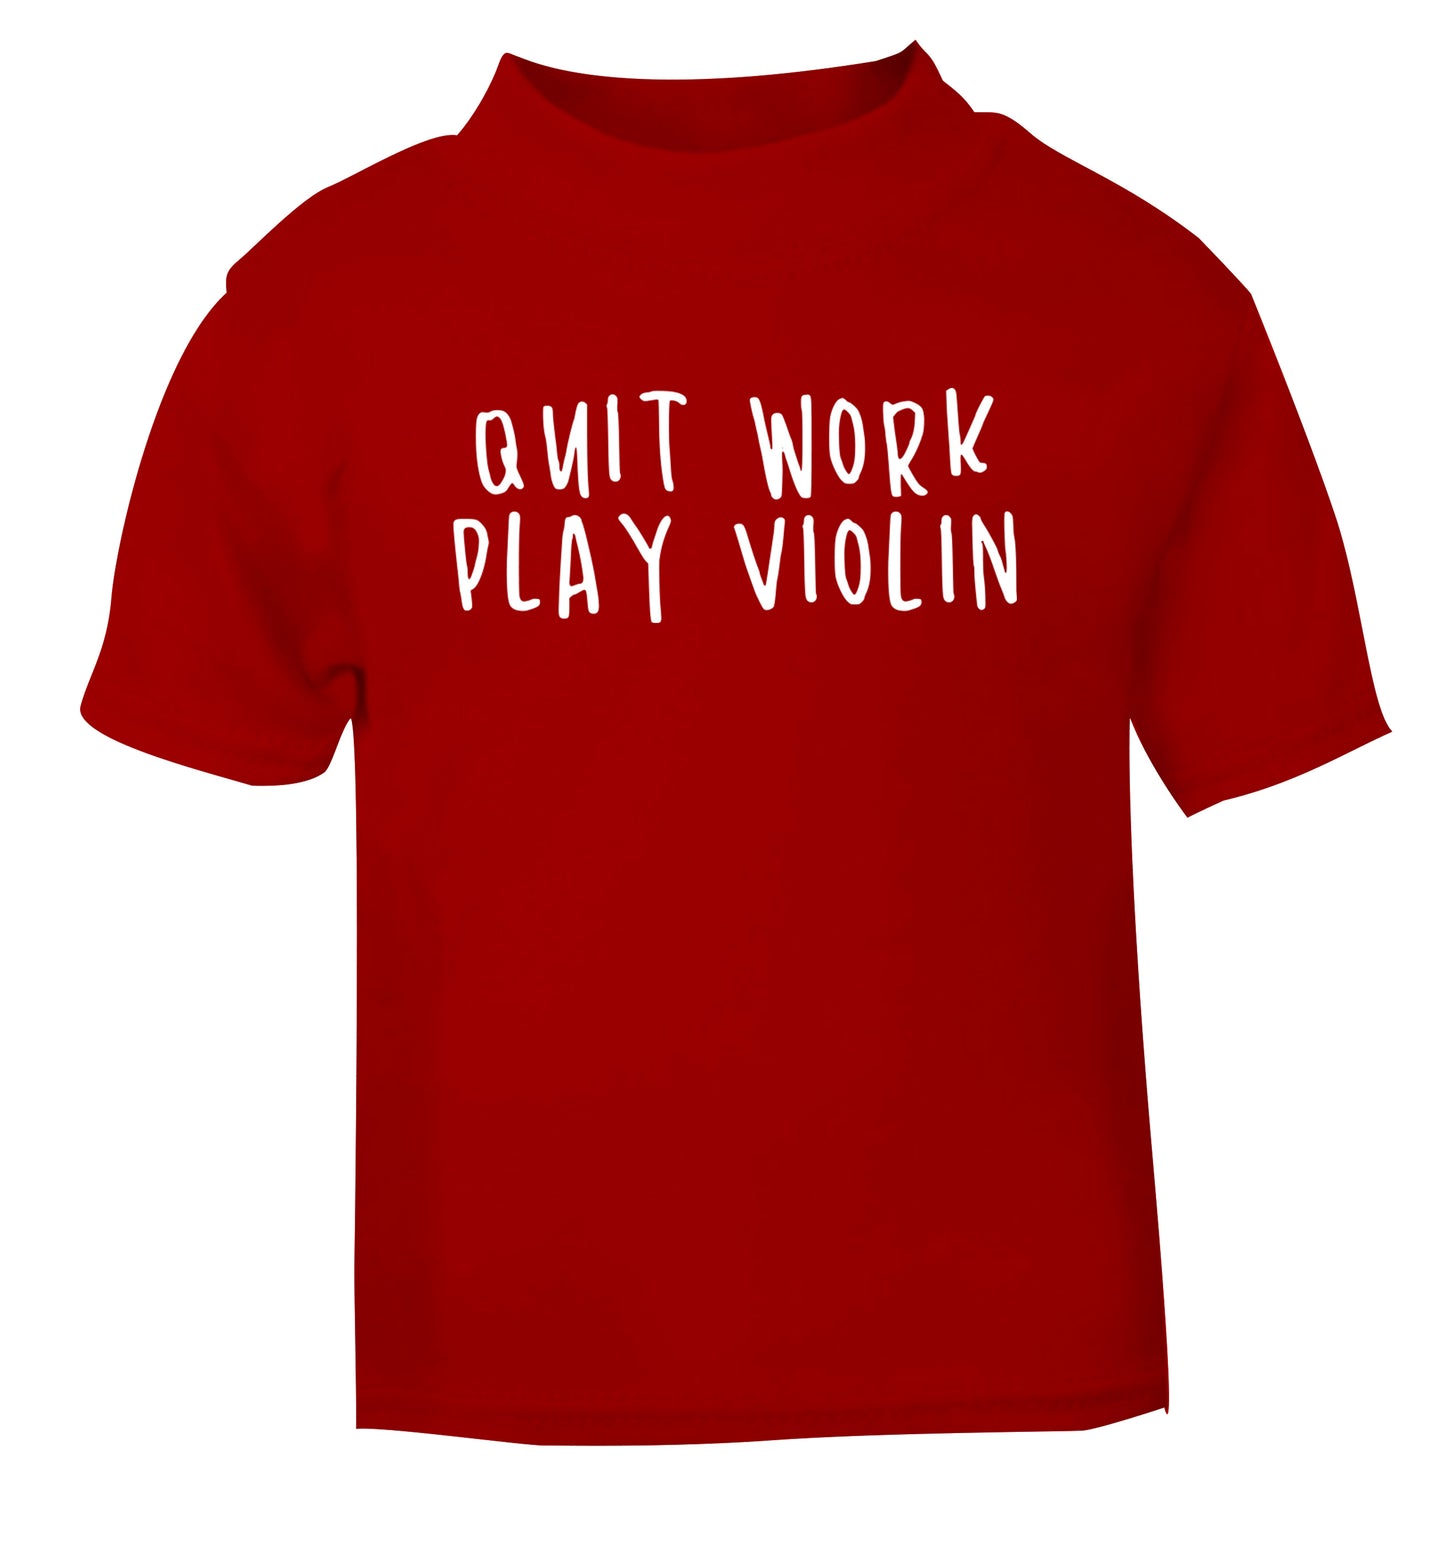 Quit work play violin red Baby Toddler Tshirt 2 Years